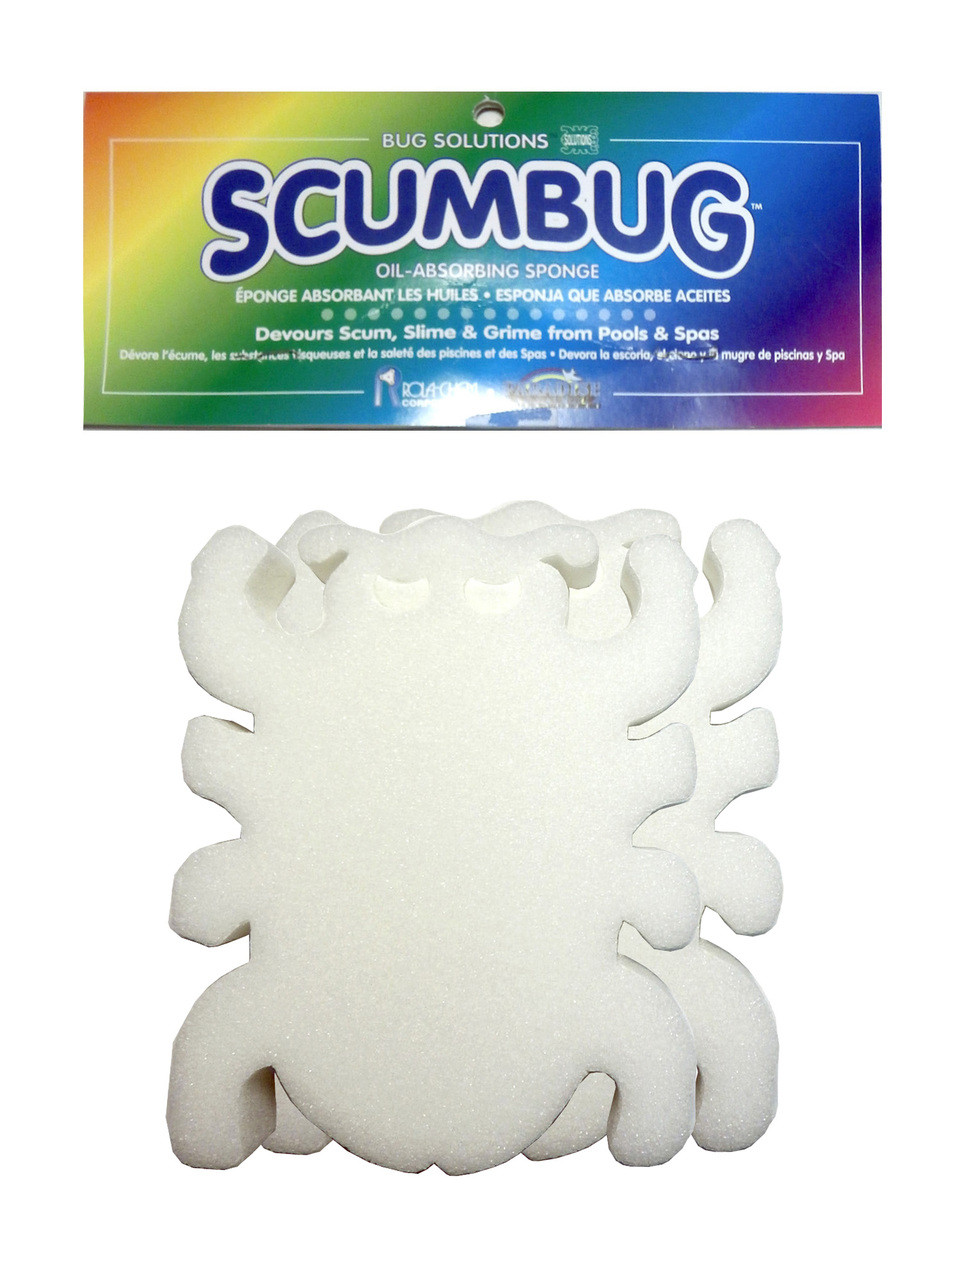 Master Spa - SCUMBUG2 - Scum Bug Oil Absorbing Sponge 2 Pack for Pools and Hot Tubs